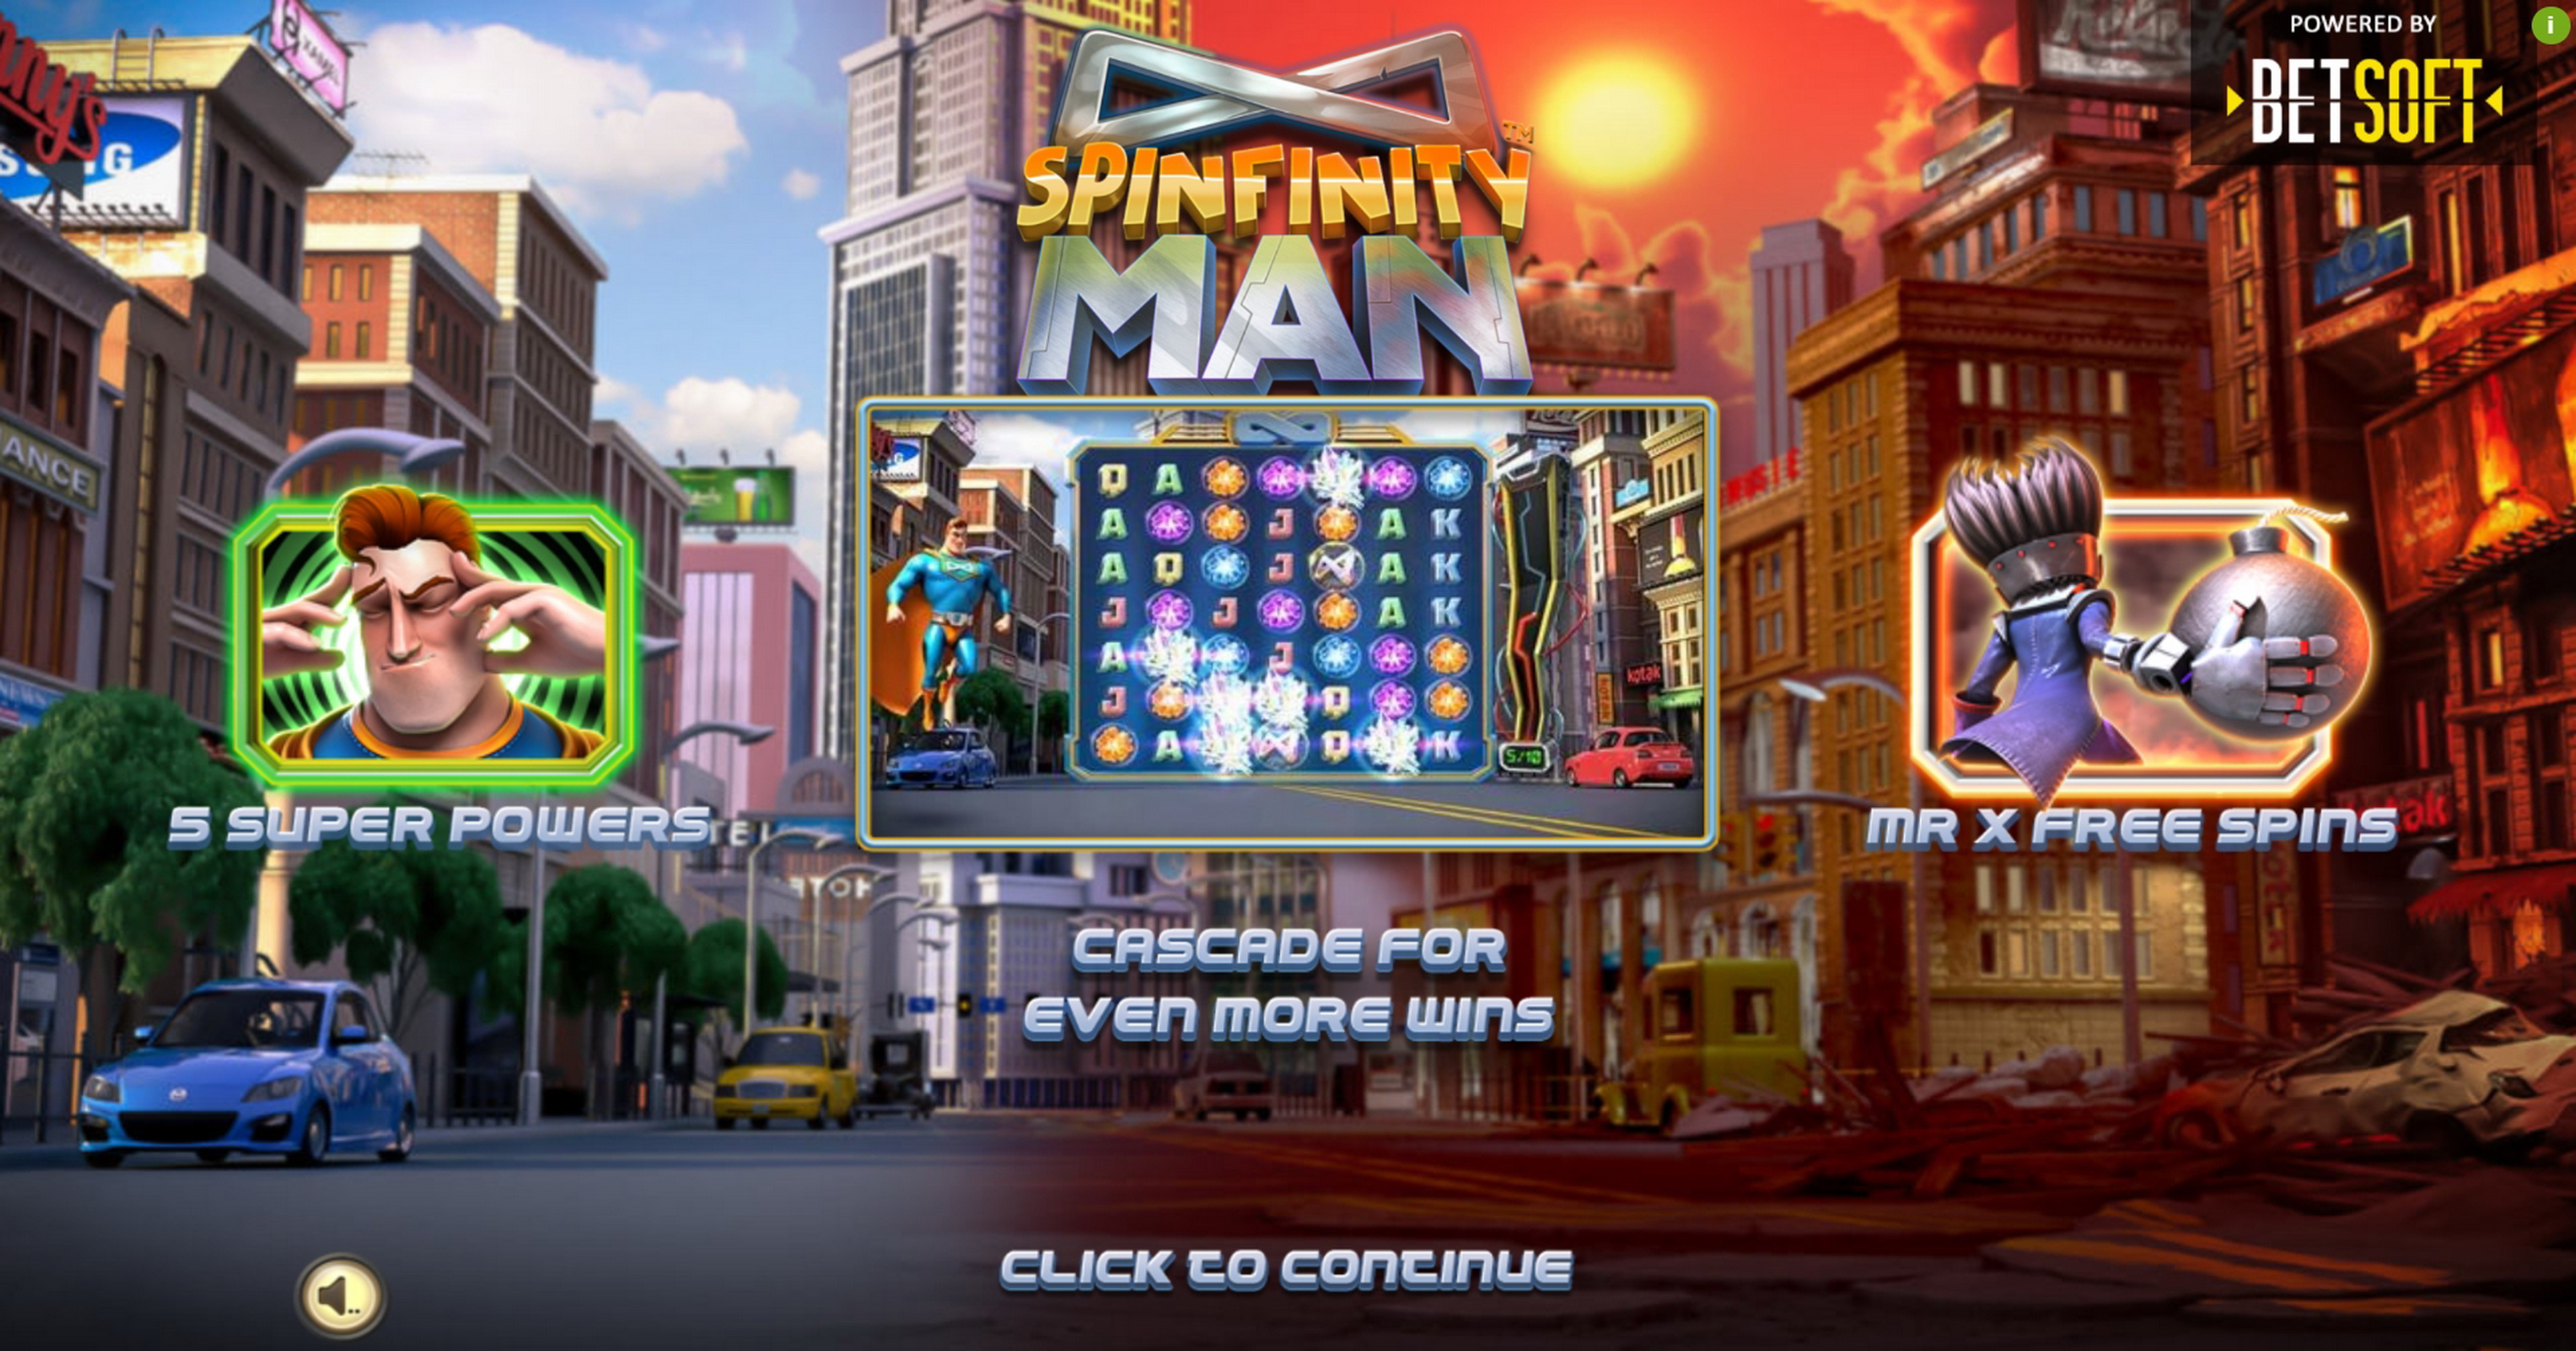 Play Spinfinity Man Free Casino Slot Game by Betsoft